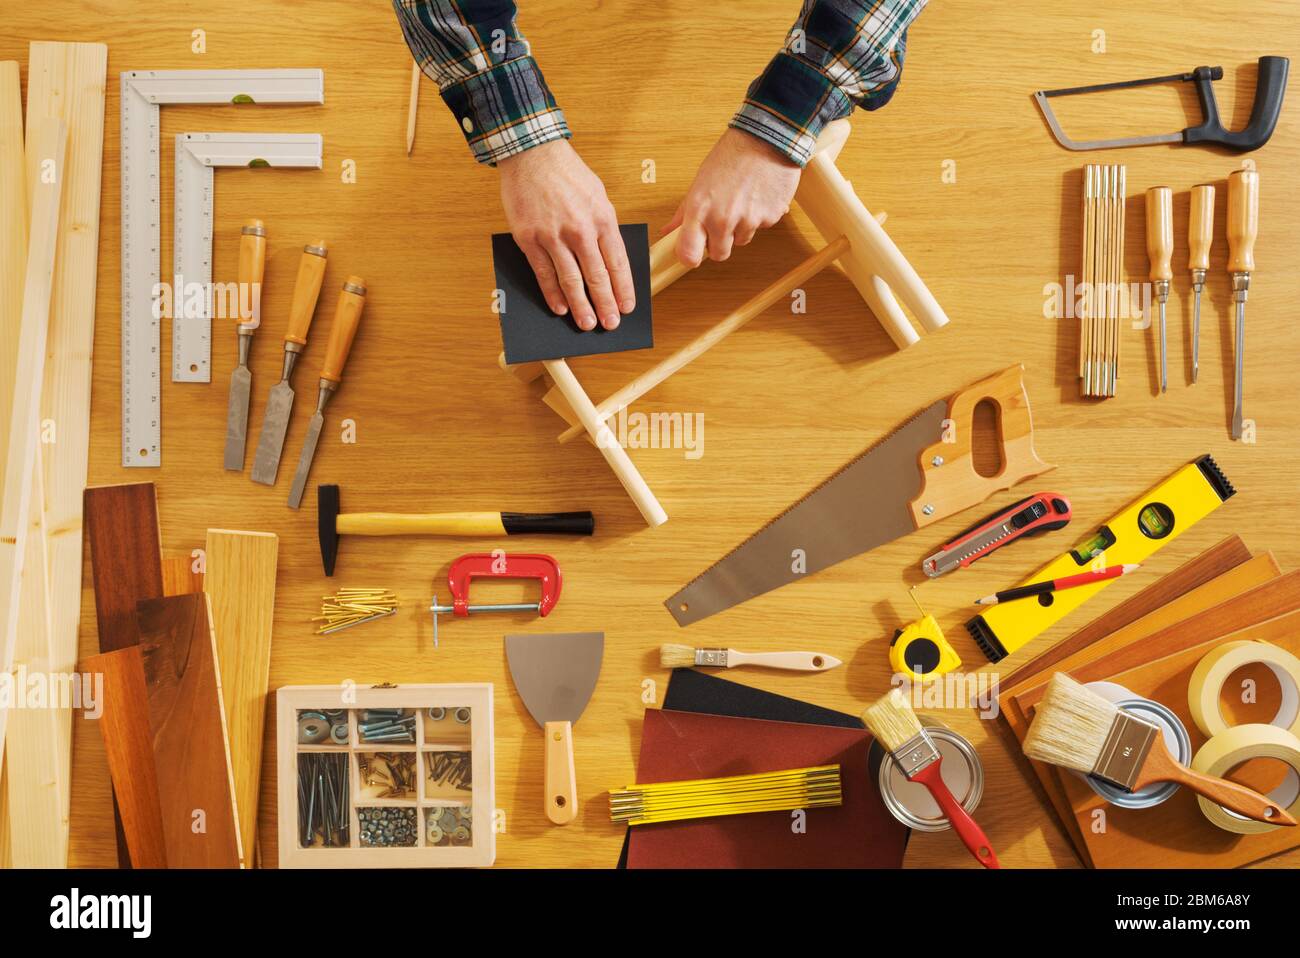 Male hands working on a footstool on a worktable smoothing the surface, DIY tools all around, top view Stock Photo